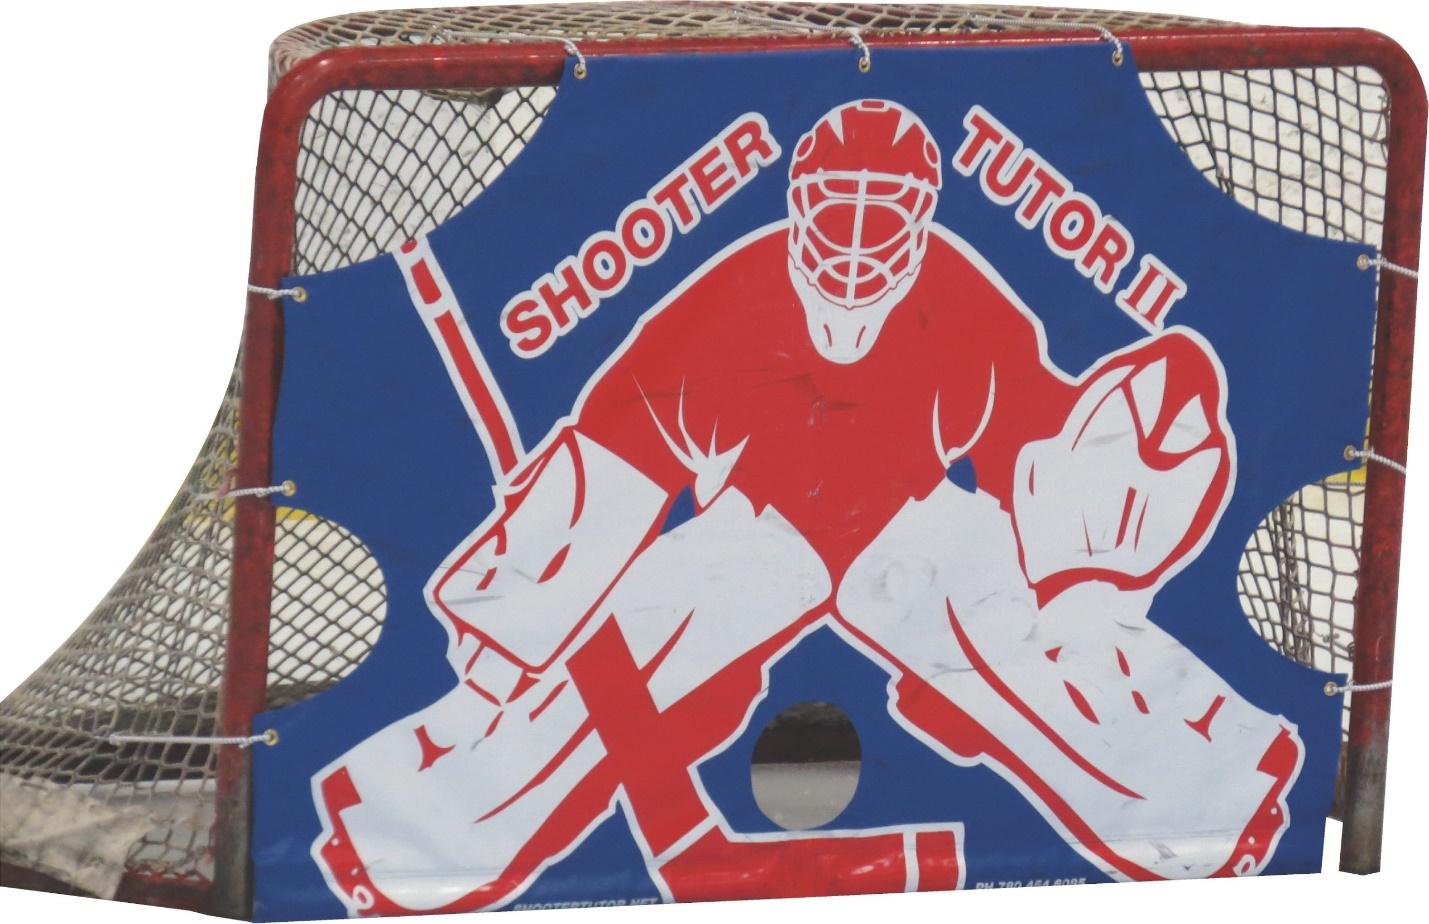 A hockey goalie with a net

Description automatically generated